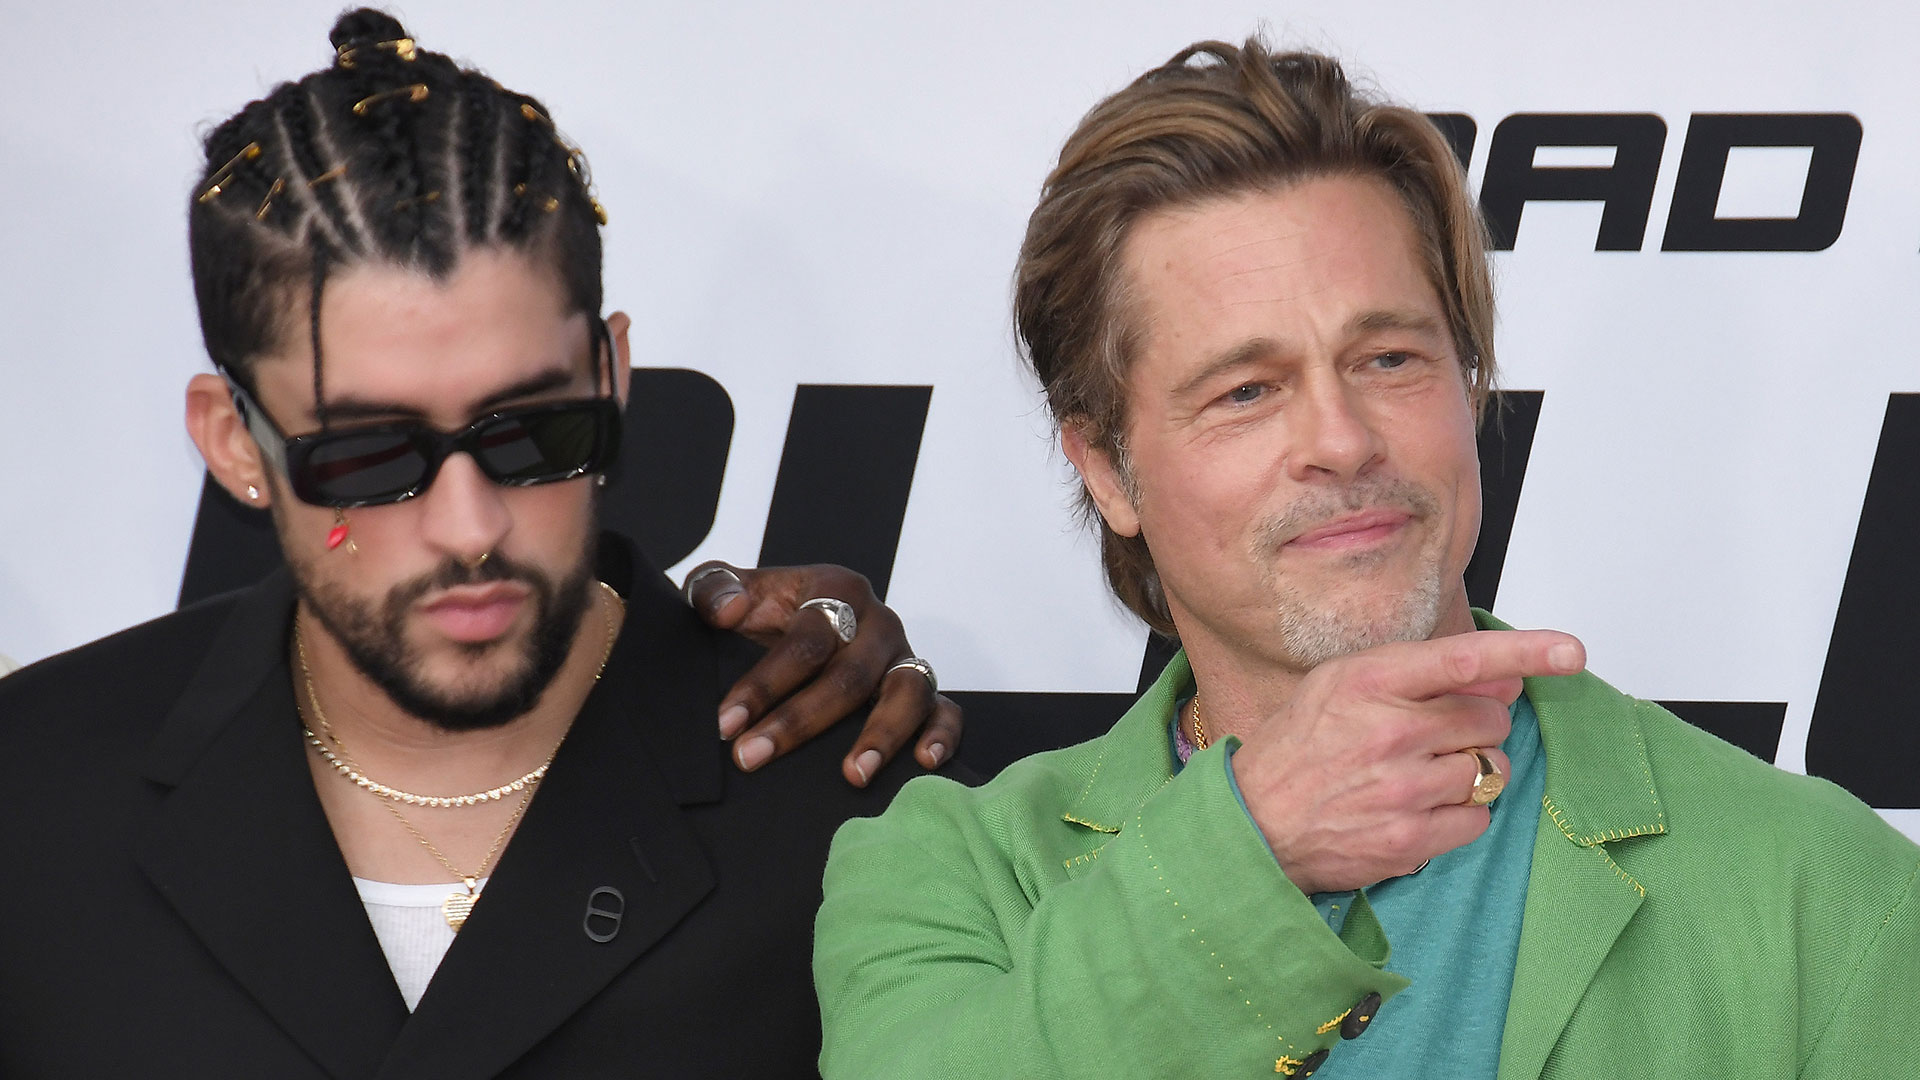 (L-R) Bad Bunny and Brad Pitt at the BULLET TRAIN Los Angeles Premiere held at the Regency Village Theater in Westwood, CA on Monday, ?August 1, 2022. (Photo By Sthanlee B. Mirador/Sipa USA)No Use Germany.